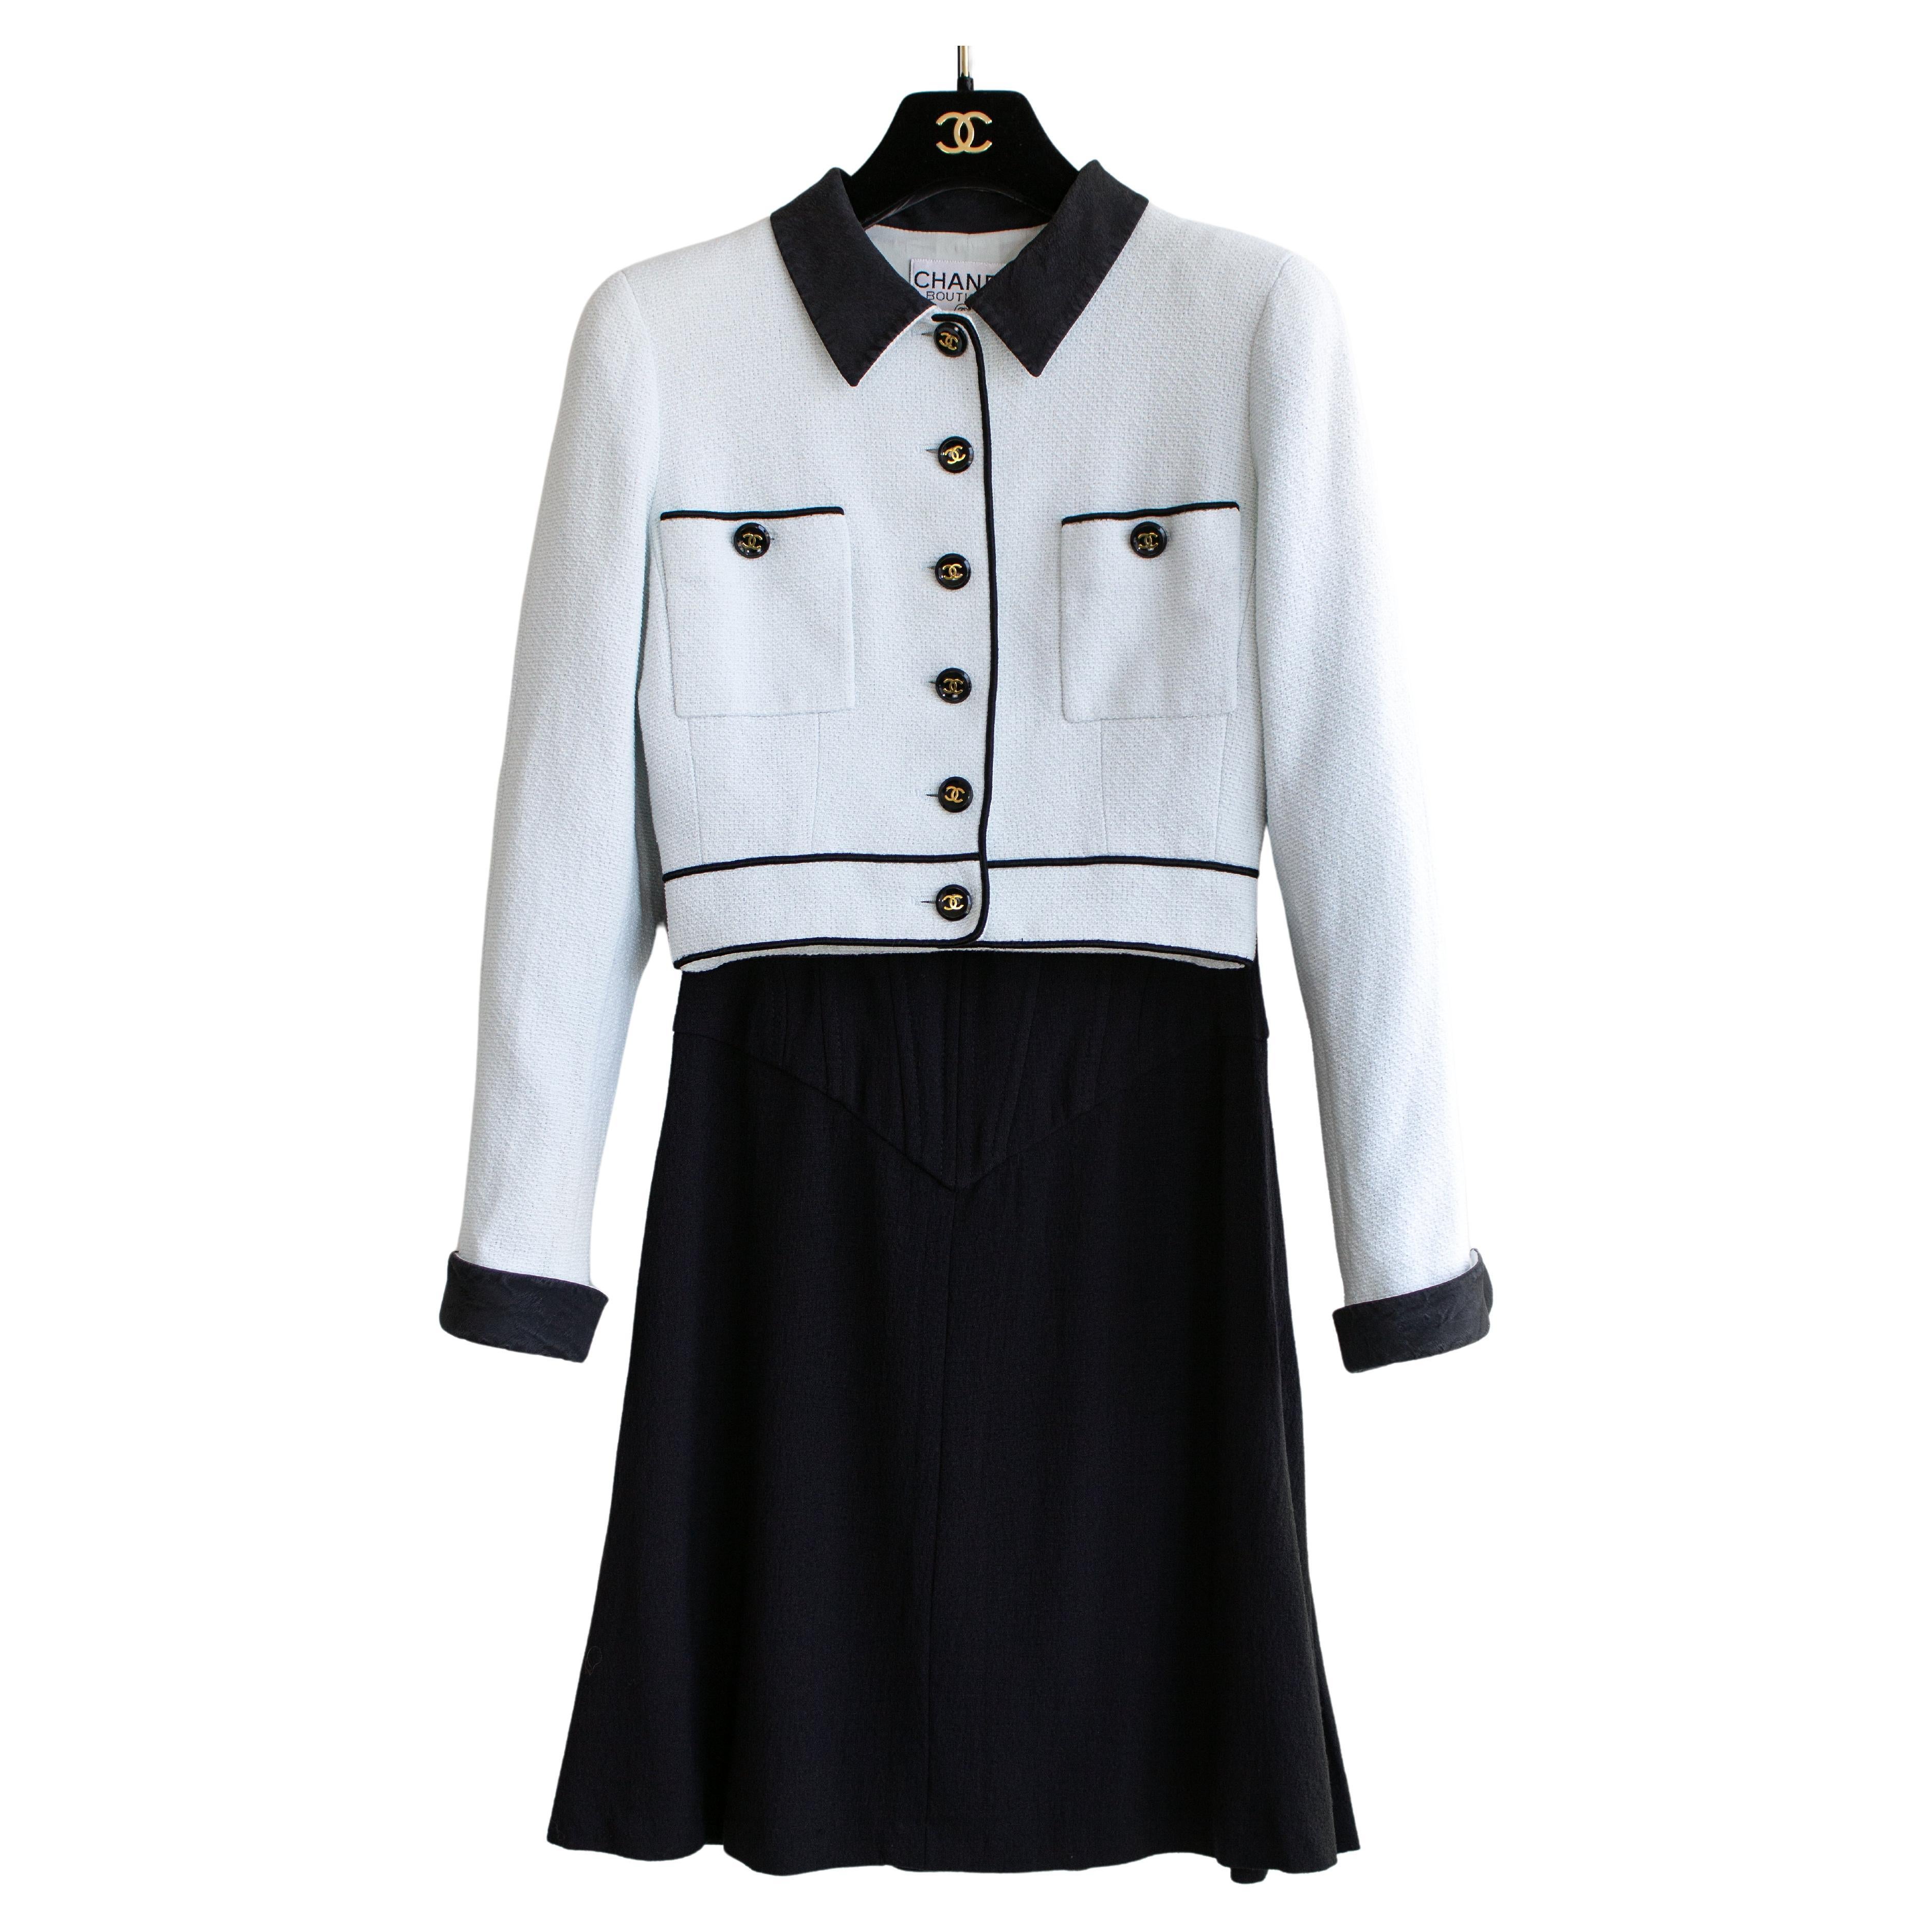 Sold at Auction: CHANEL- Vintage White CC Suit Jacket and Skirt